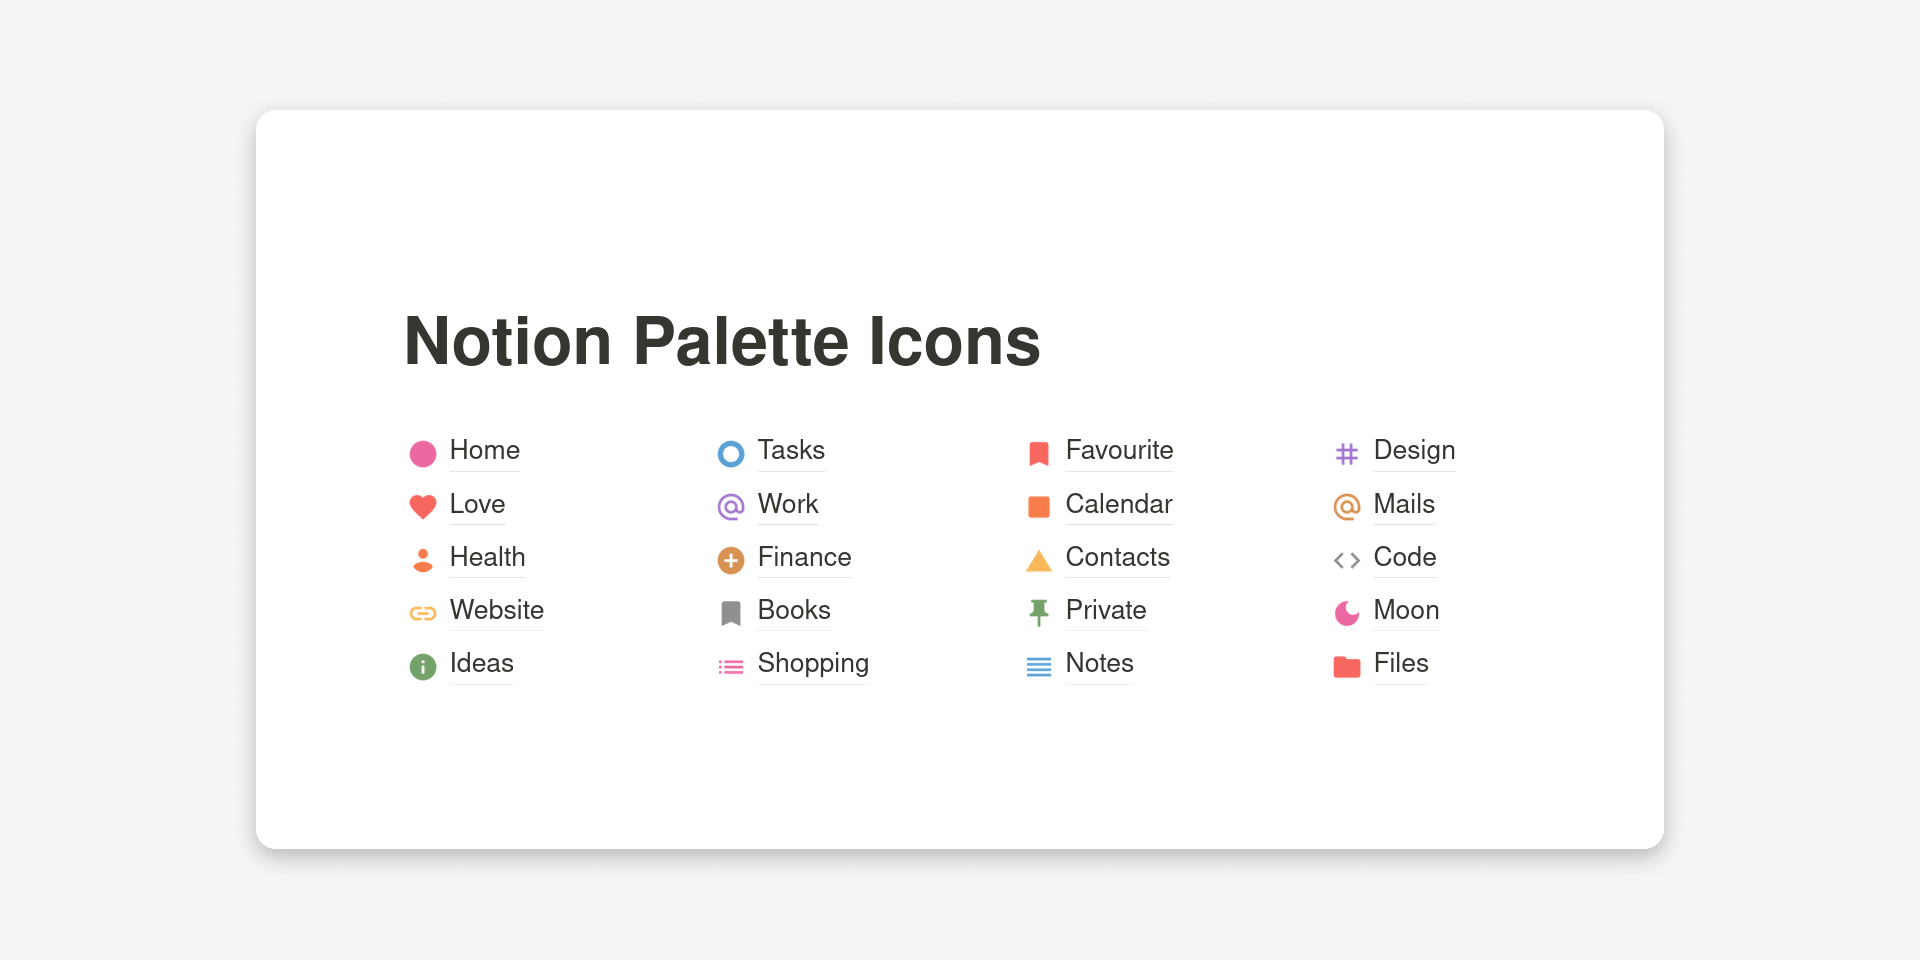 Notion Palette Icons - Light Mode